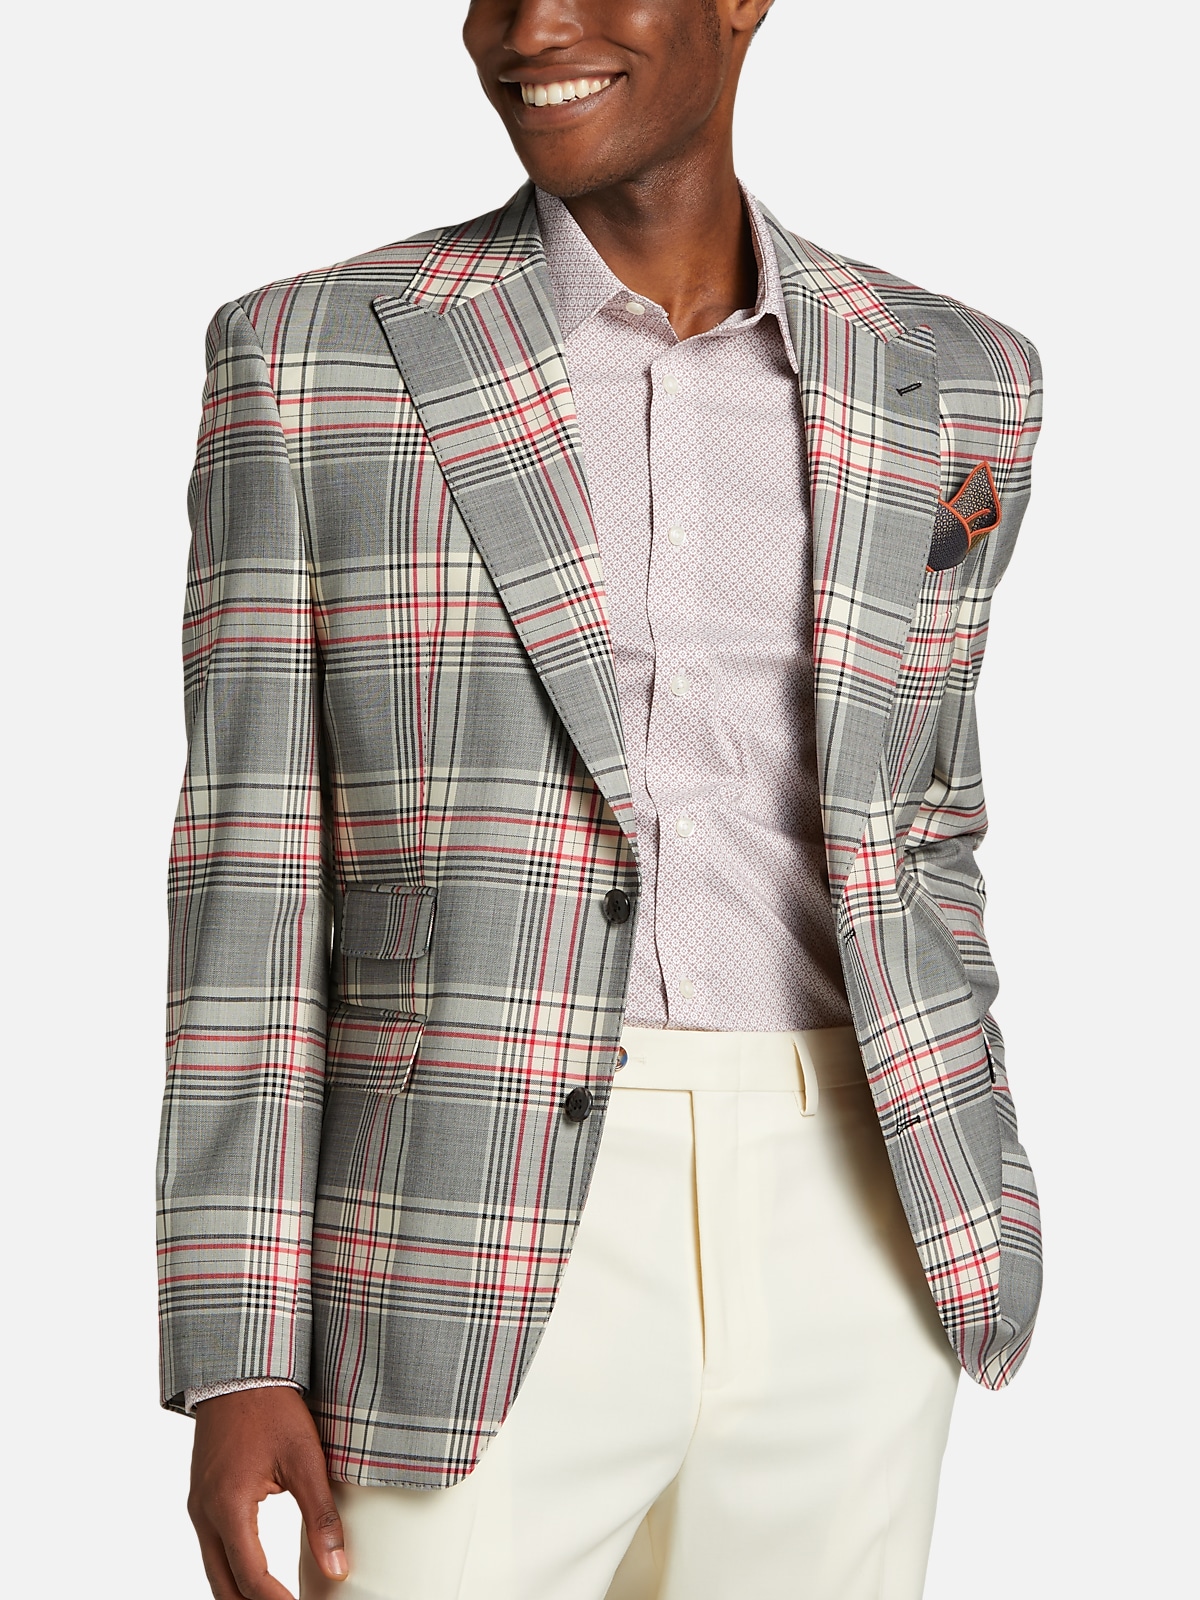 Tayion Classic Fit Suit Separates Jacket | All Sale| Men's Wearhouse